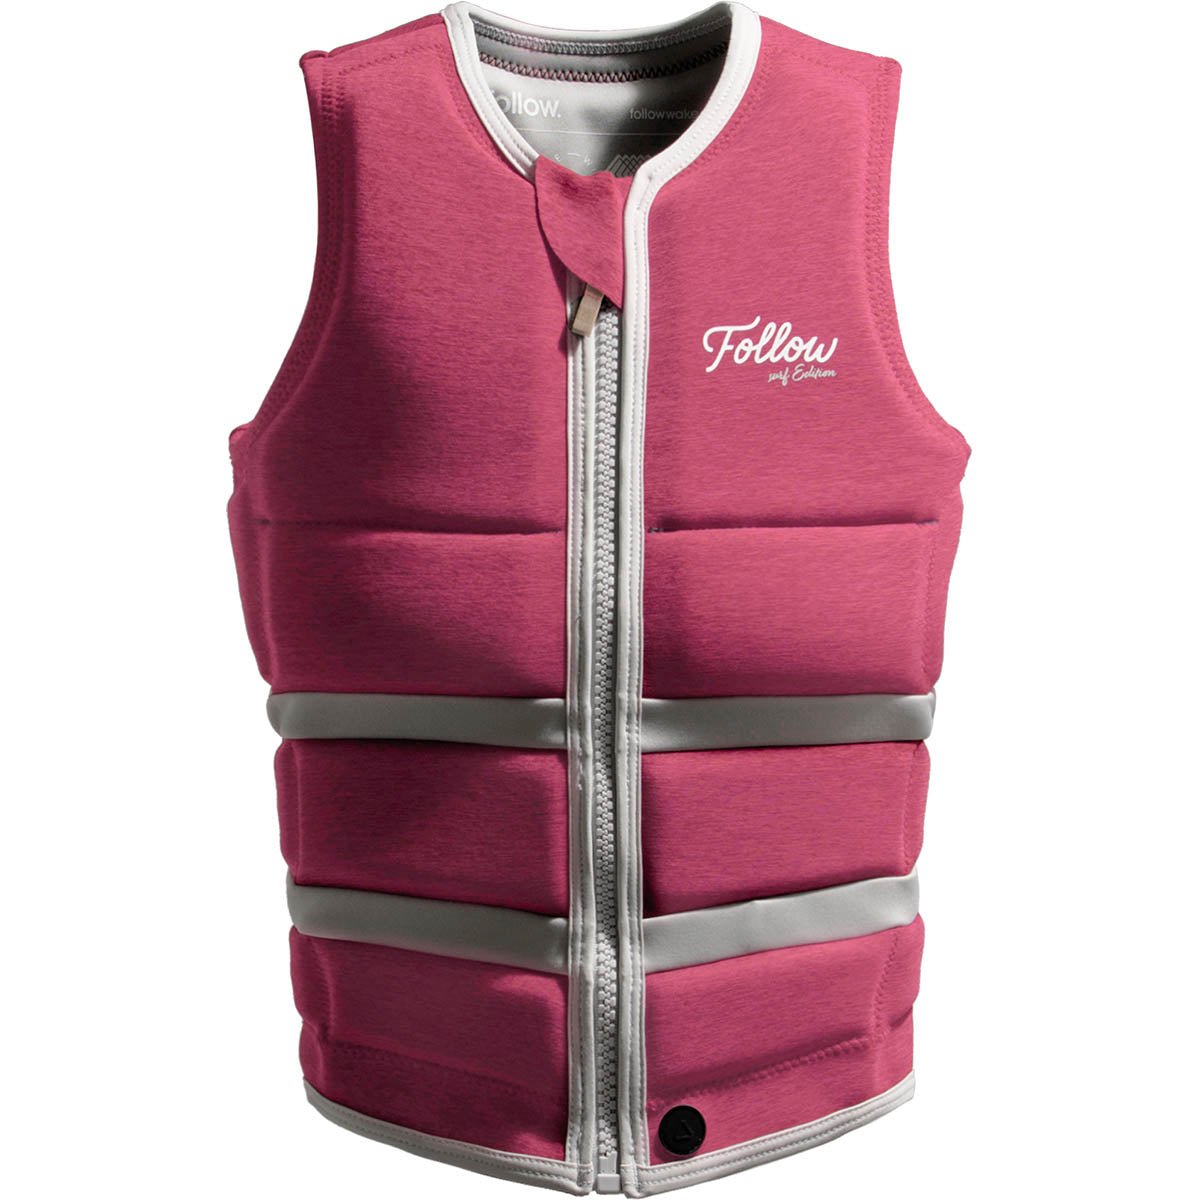 Follow Surf Edition Ladies Comp Wake Vest in Pink - BoardCo